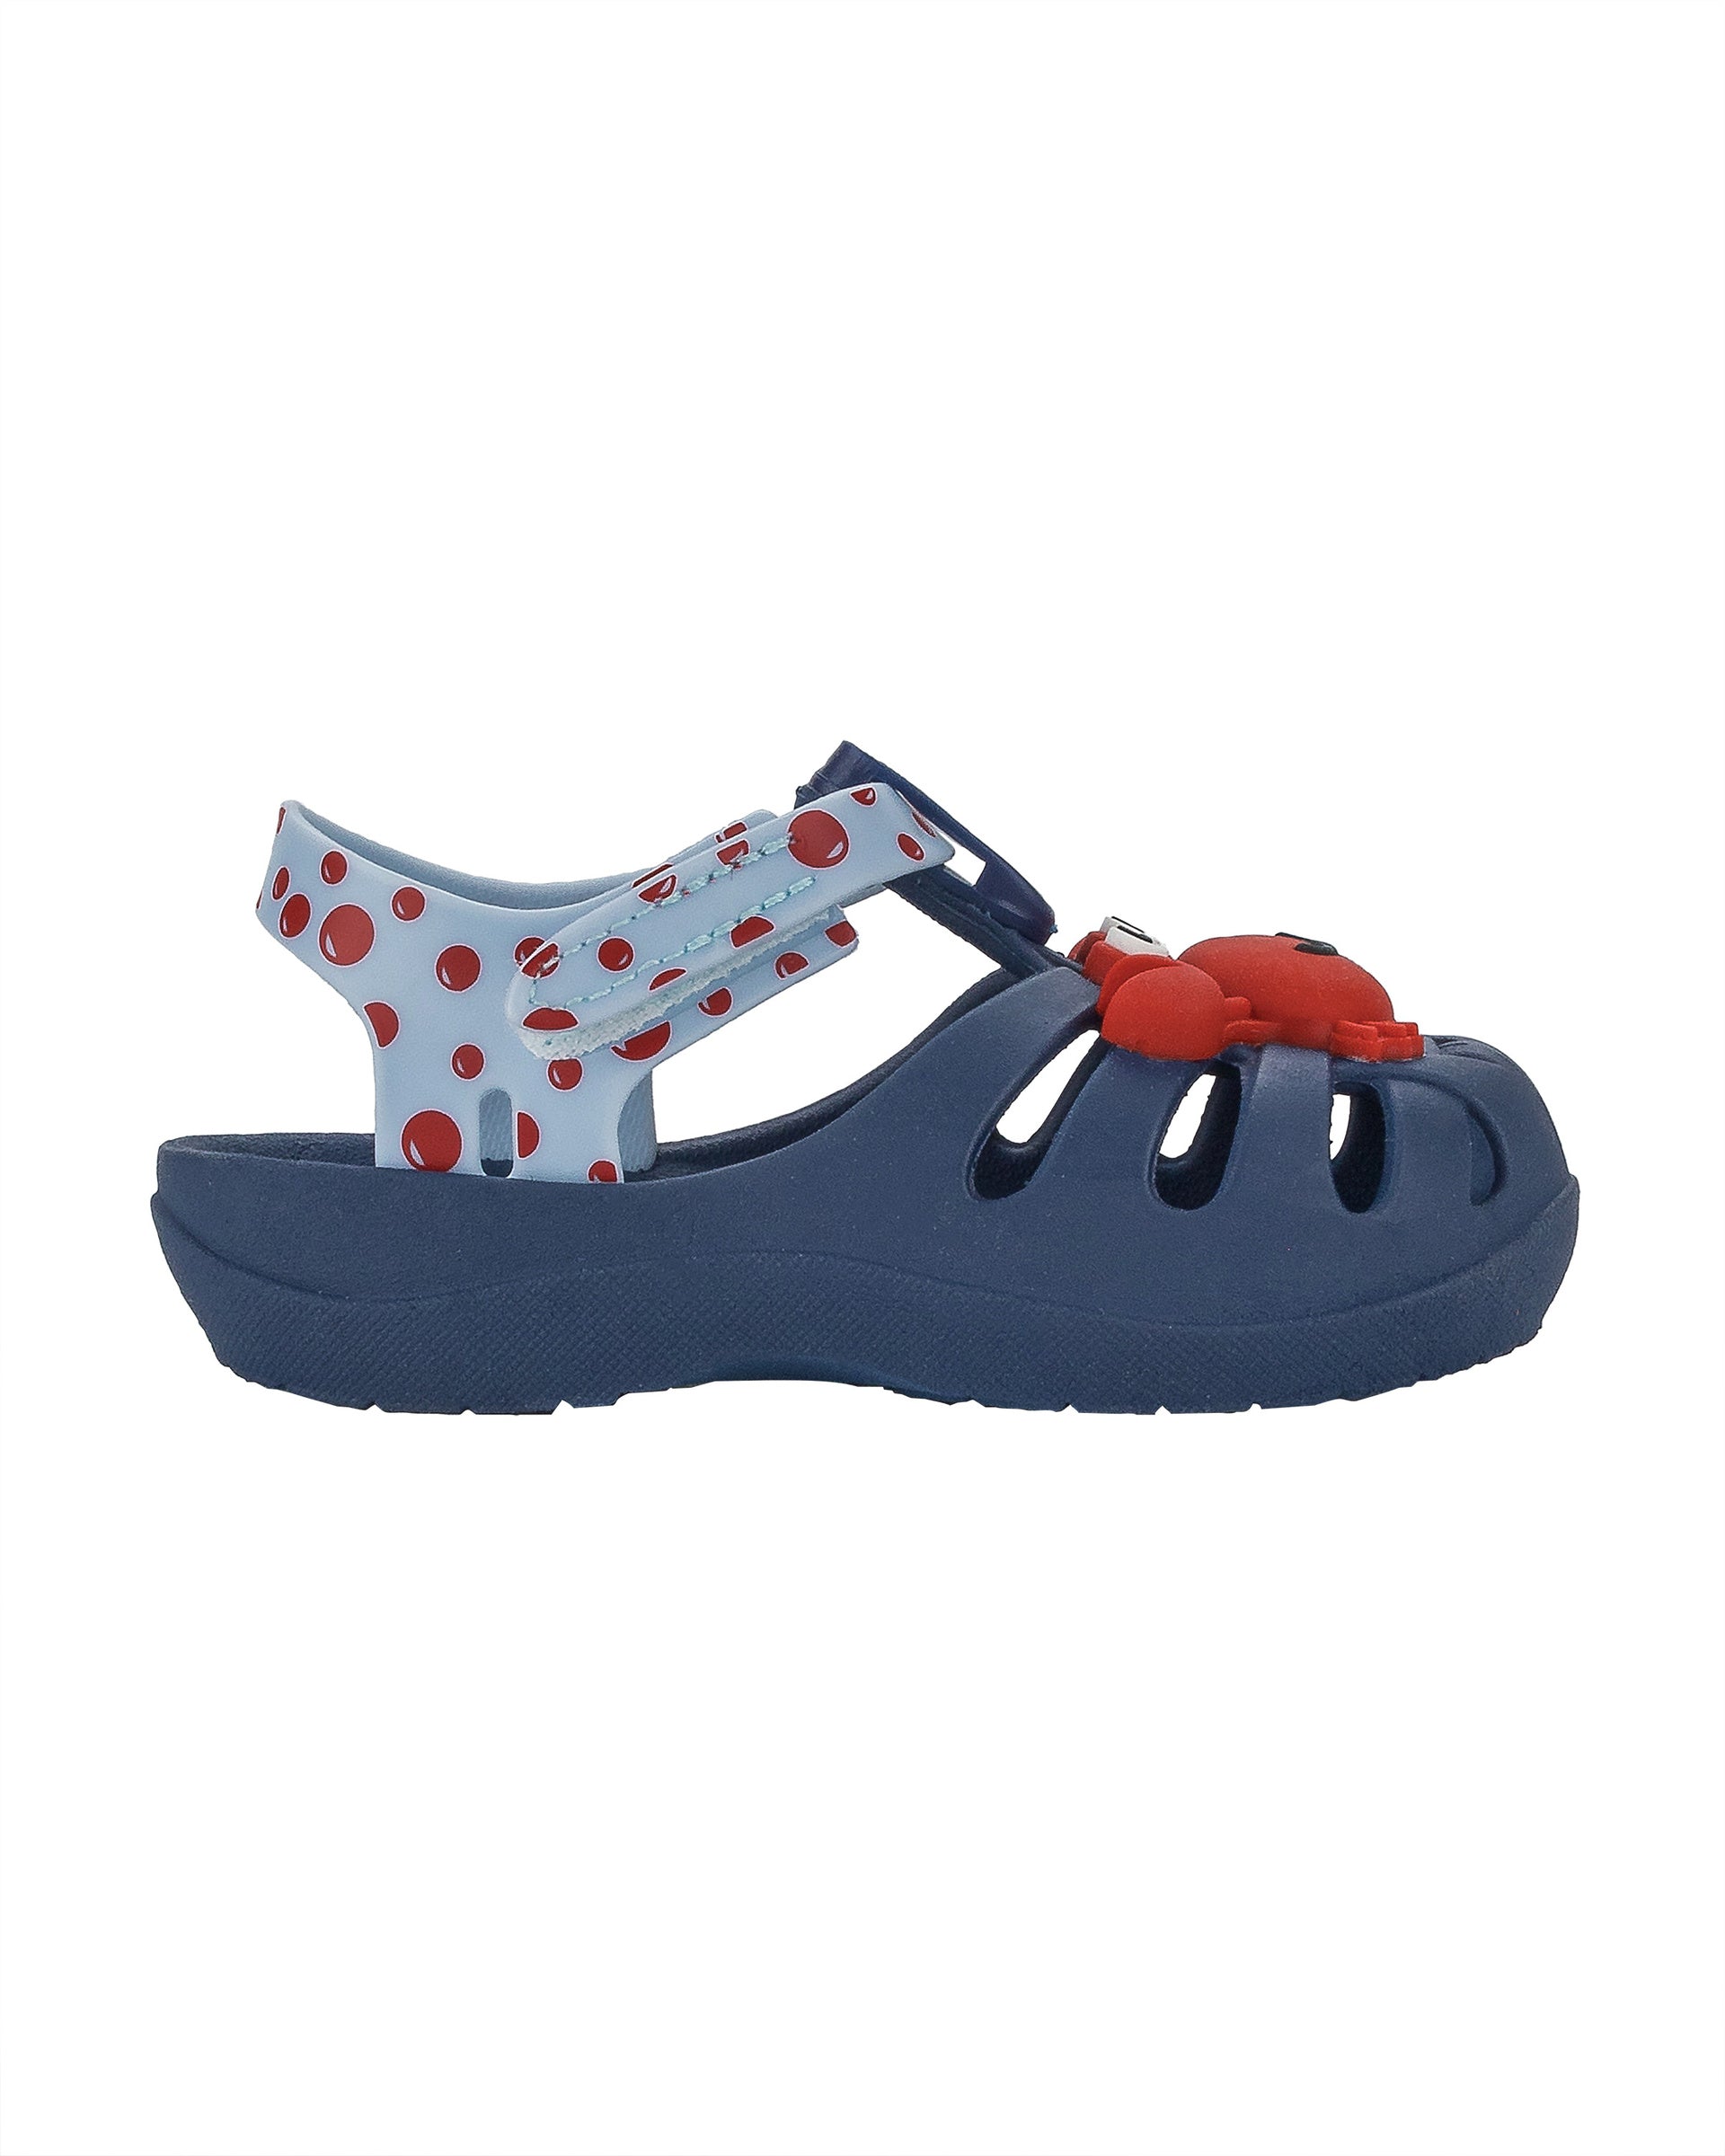 Outer side view of a blue/light blue Ipanema Summer baby fisherman sandal with red crab on the upper.